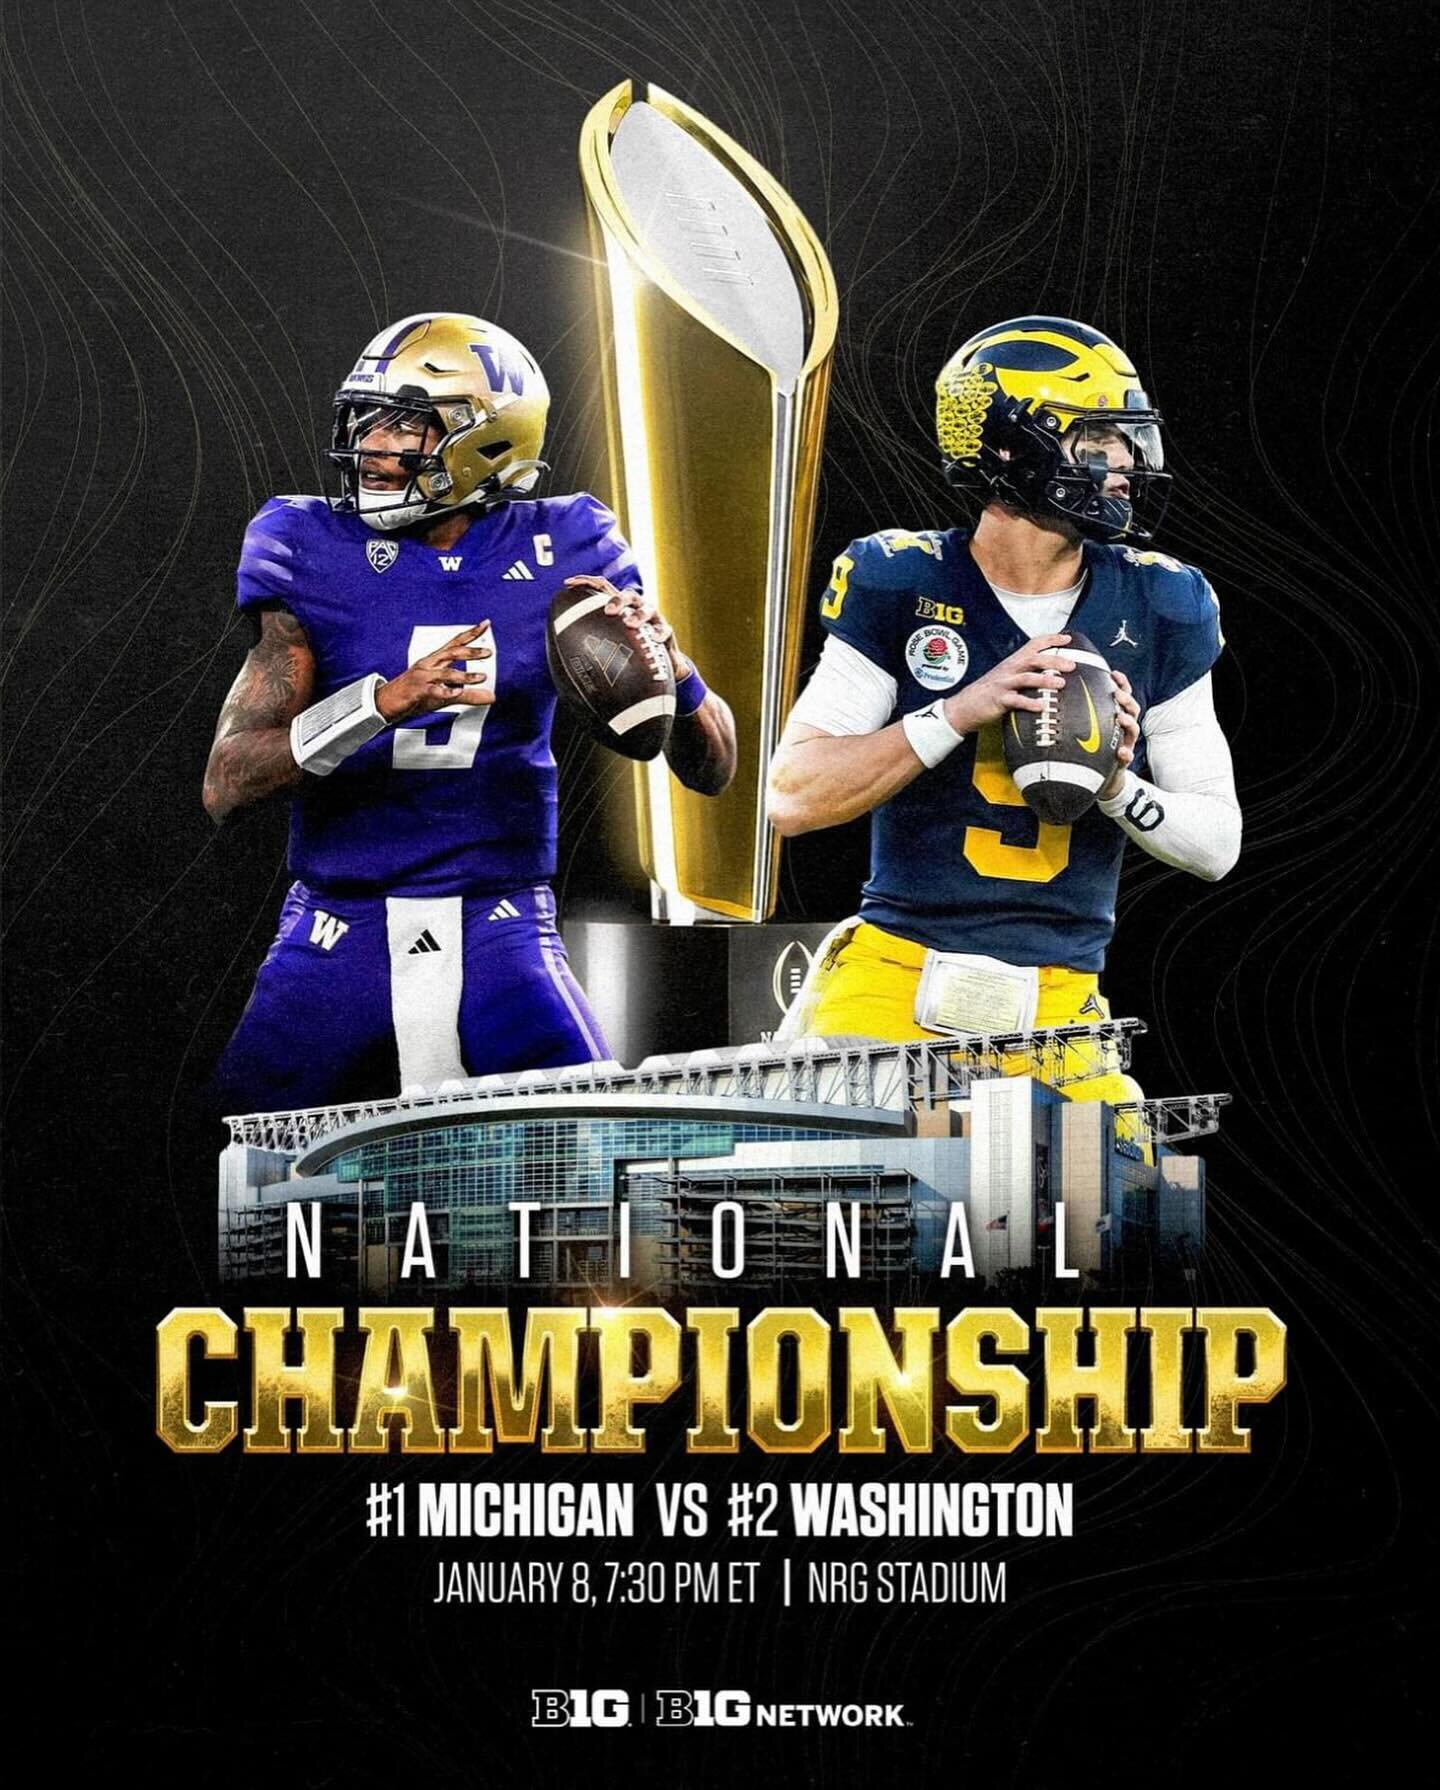 Monday night is going to be awesome. I LOVE football. And I love me some college football. While neither is my team this should be a good game! 

As our city grows, having more and more spots to watch big games like this is a priority for me. I look 